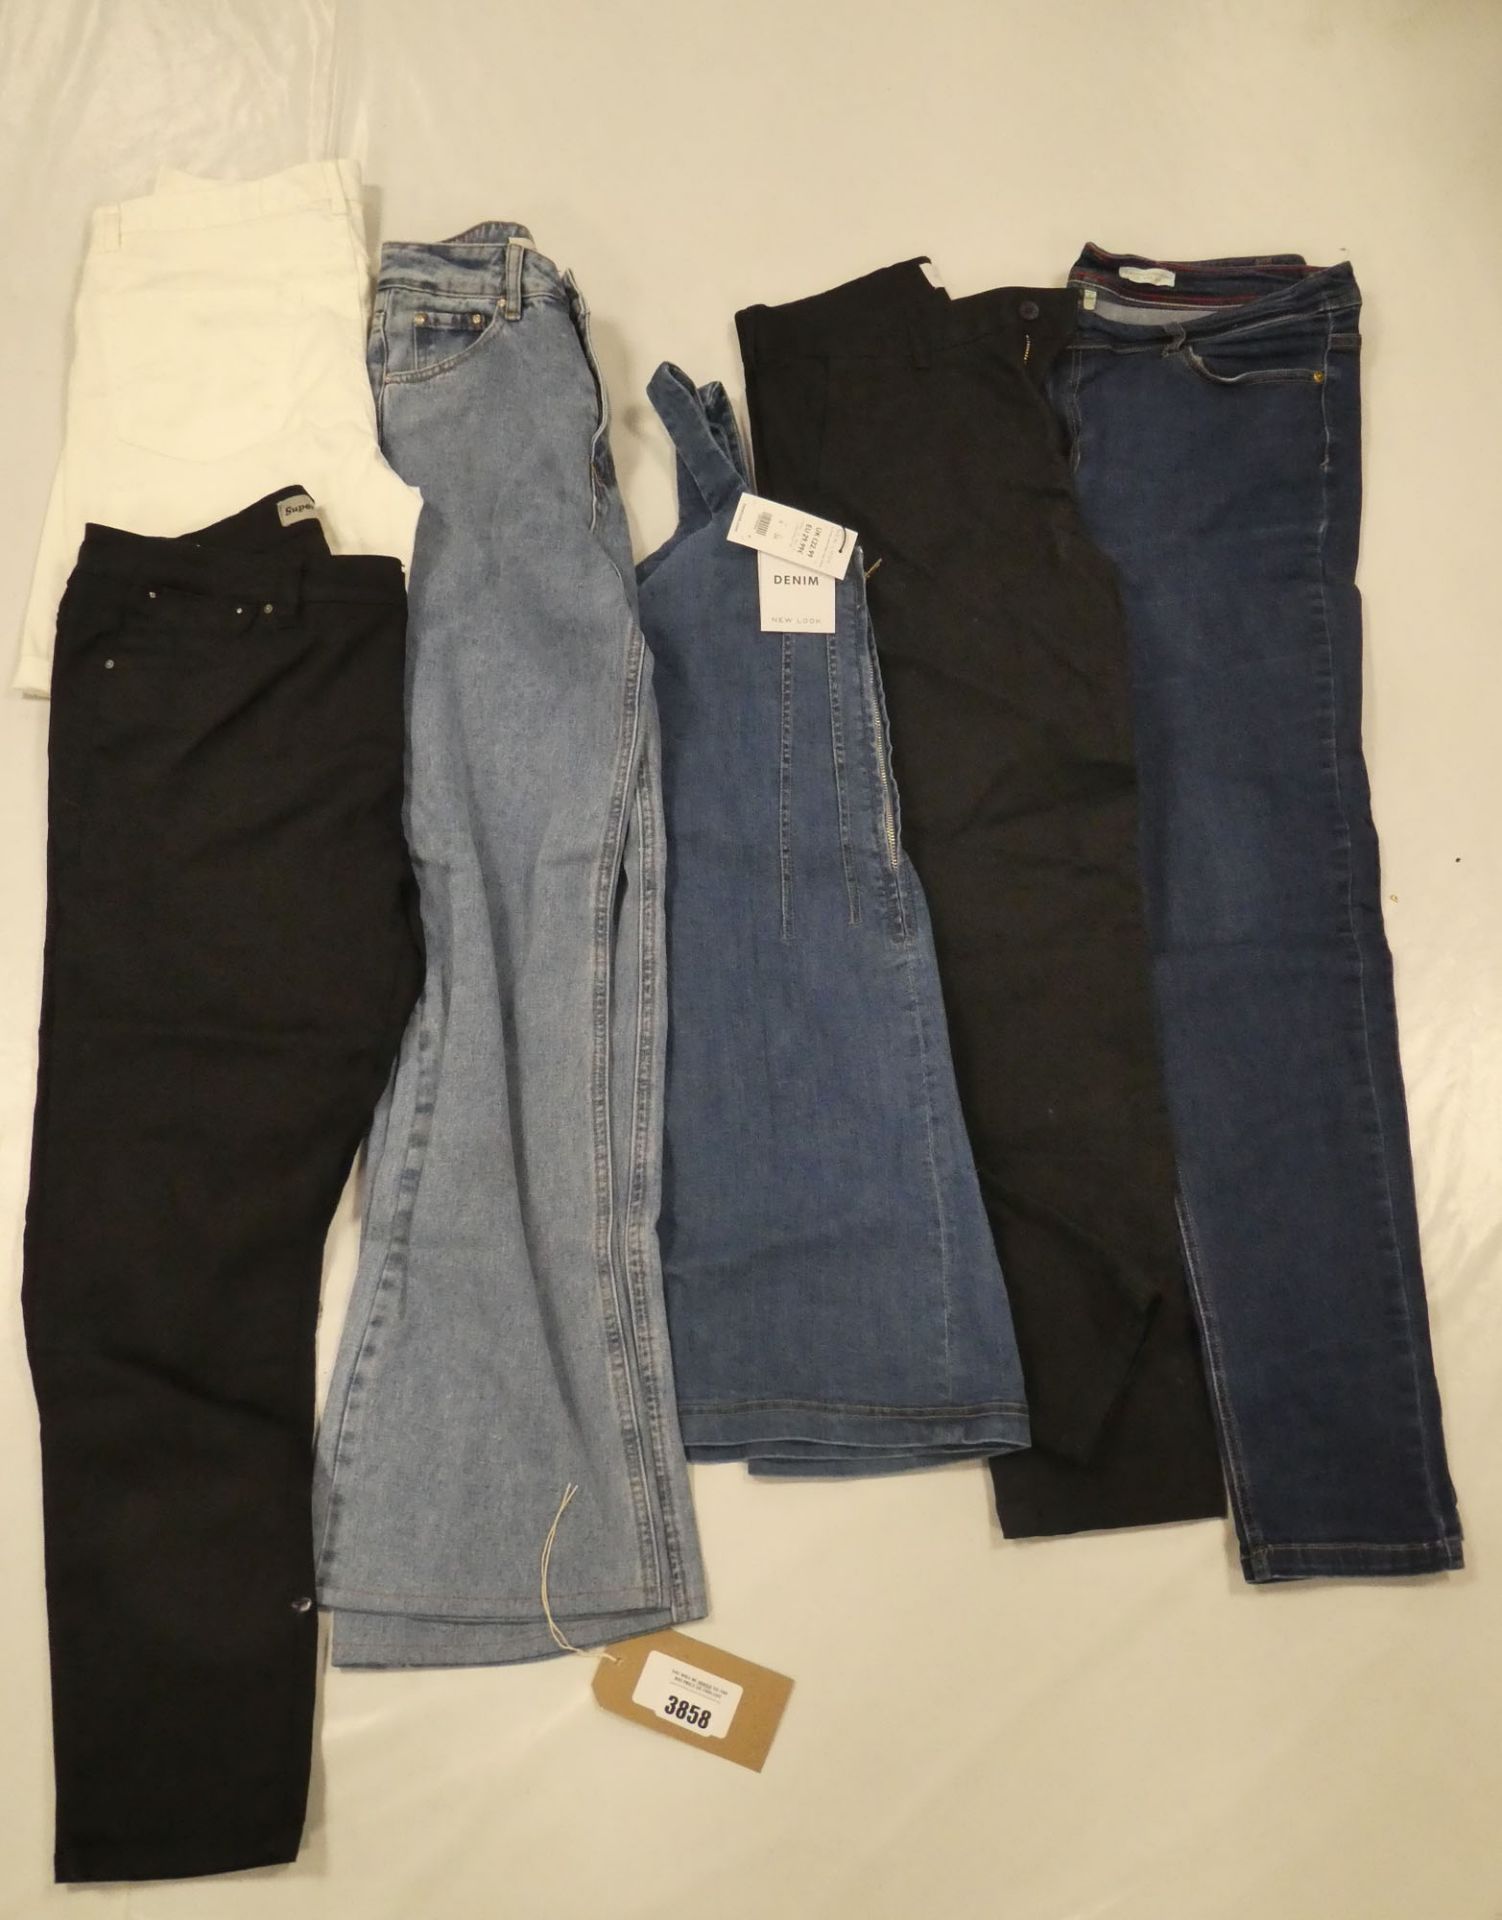 Selection of denim wear to include Joules, Top Man, New Look, etc